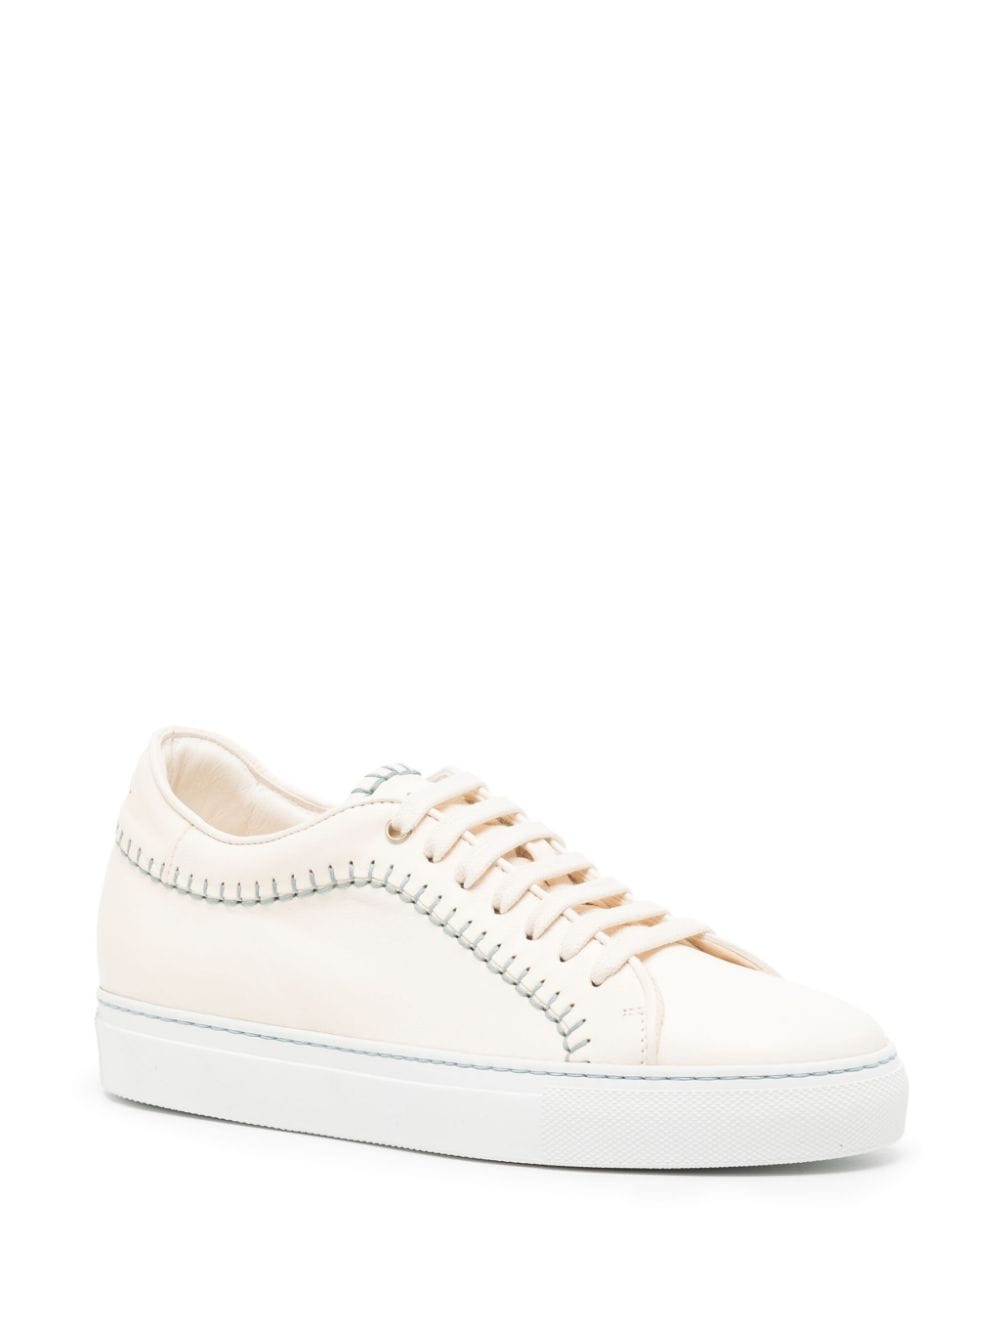 Paul Smith Basso leather sneakers - Beige